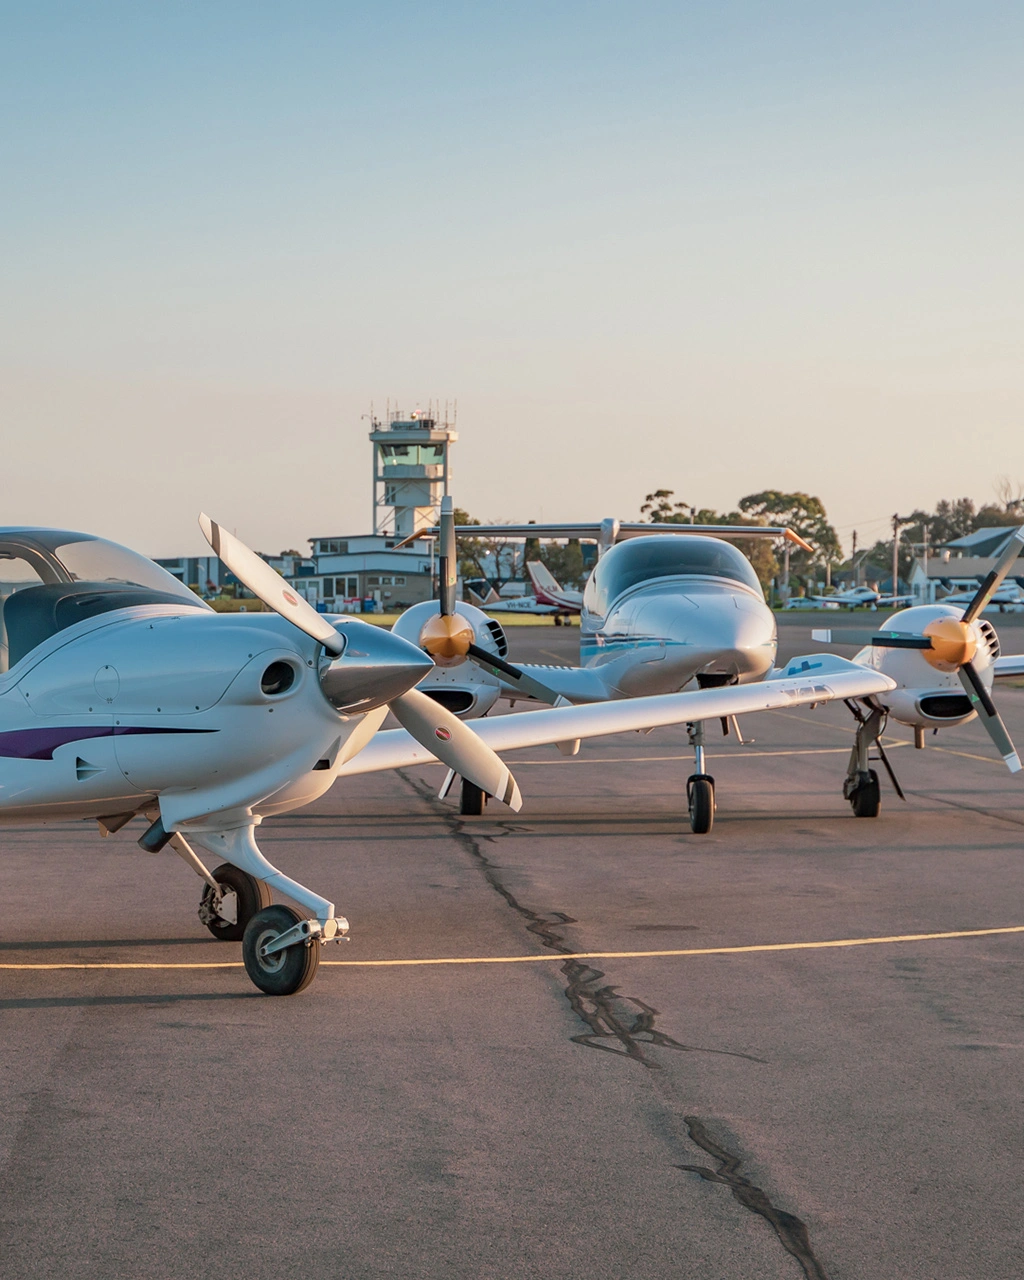 Why Should You Do Your Flight Training With Learn To Fly Melbourne?